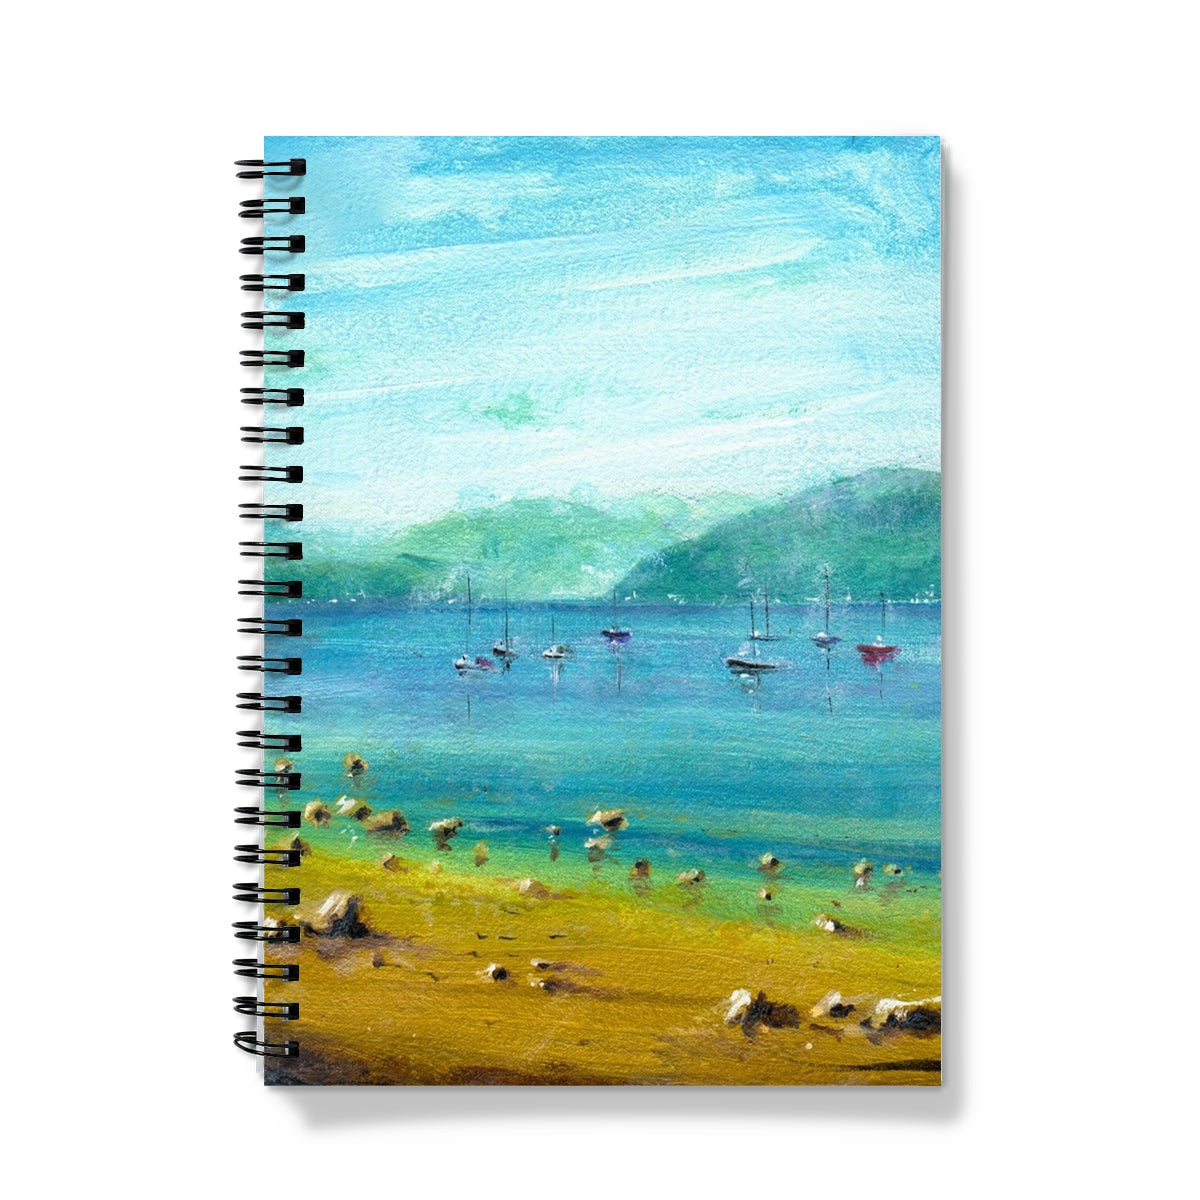 A Clyde Summer Day Art Gifts Notebook-Journals & Notebooks-River Clyde Art Gallery-A5-Graph-Paintings, Prints, Homeware, Art Gifts From Scotland By Scottish Artist Kevin Hunter